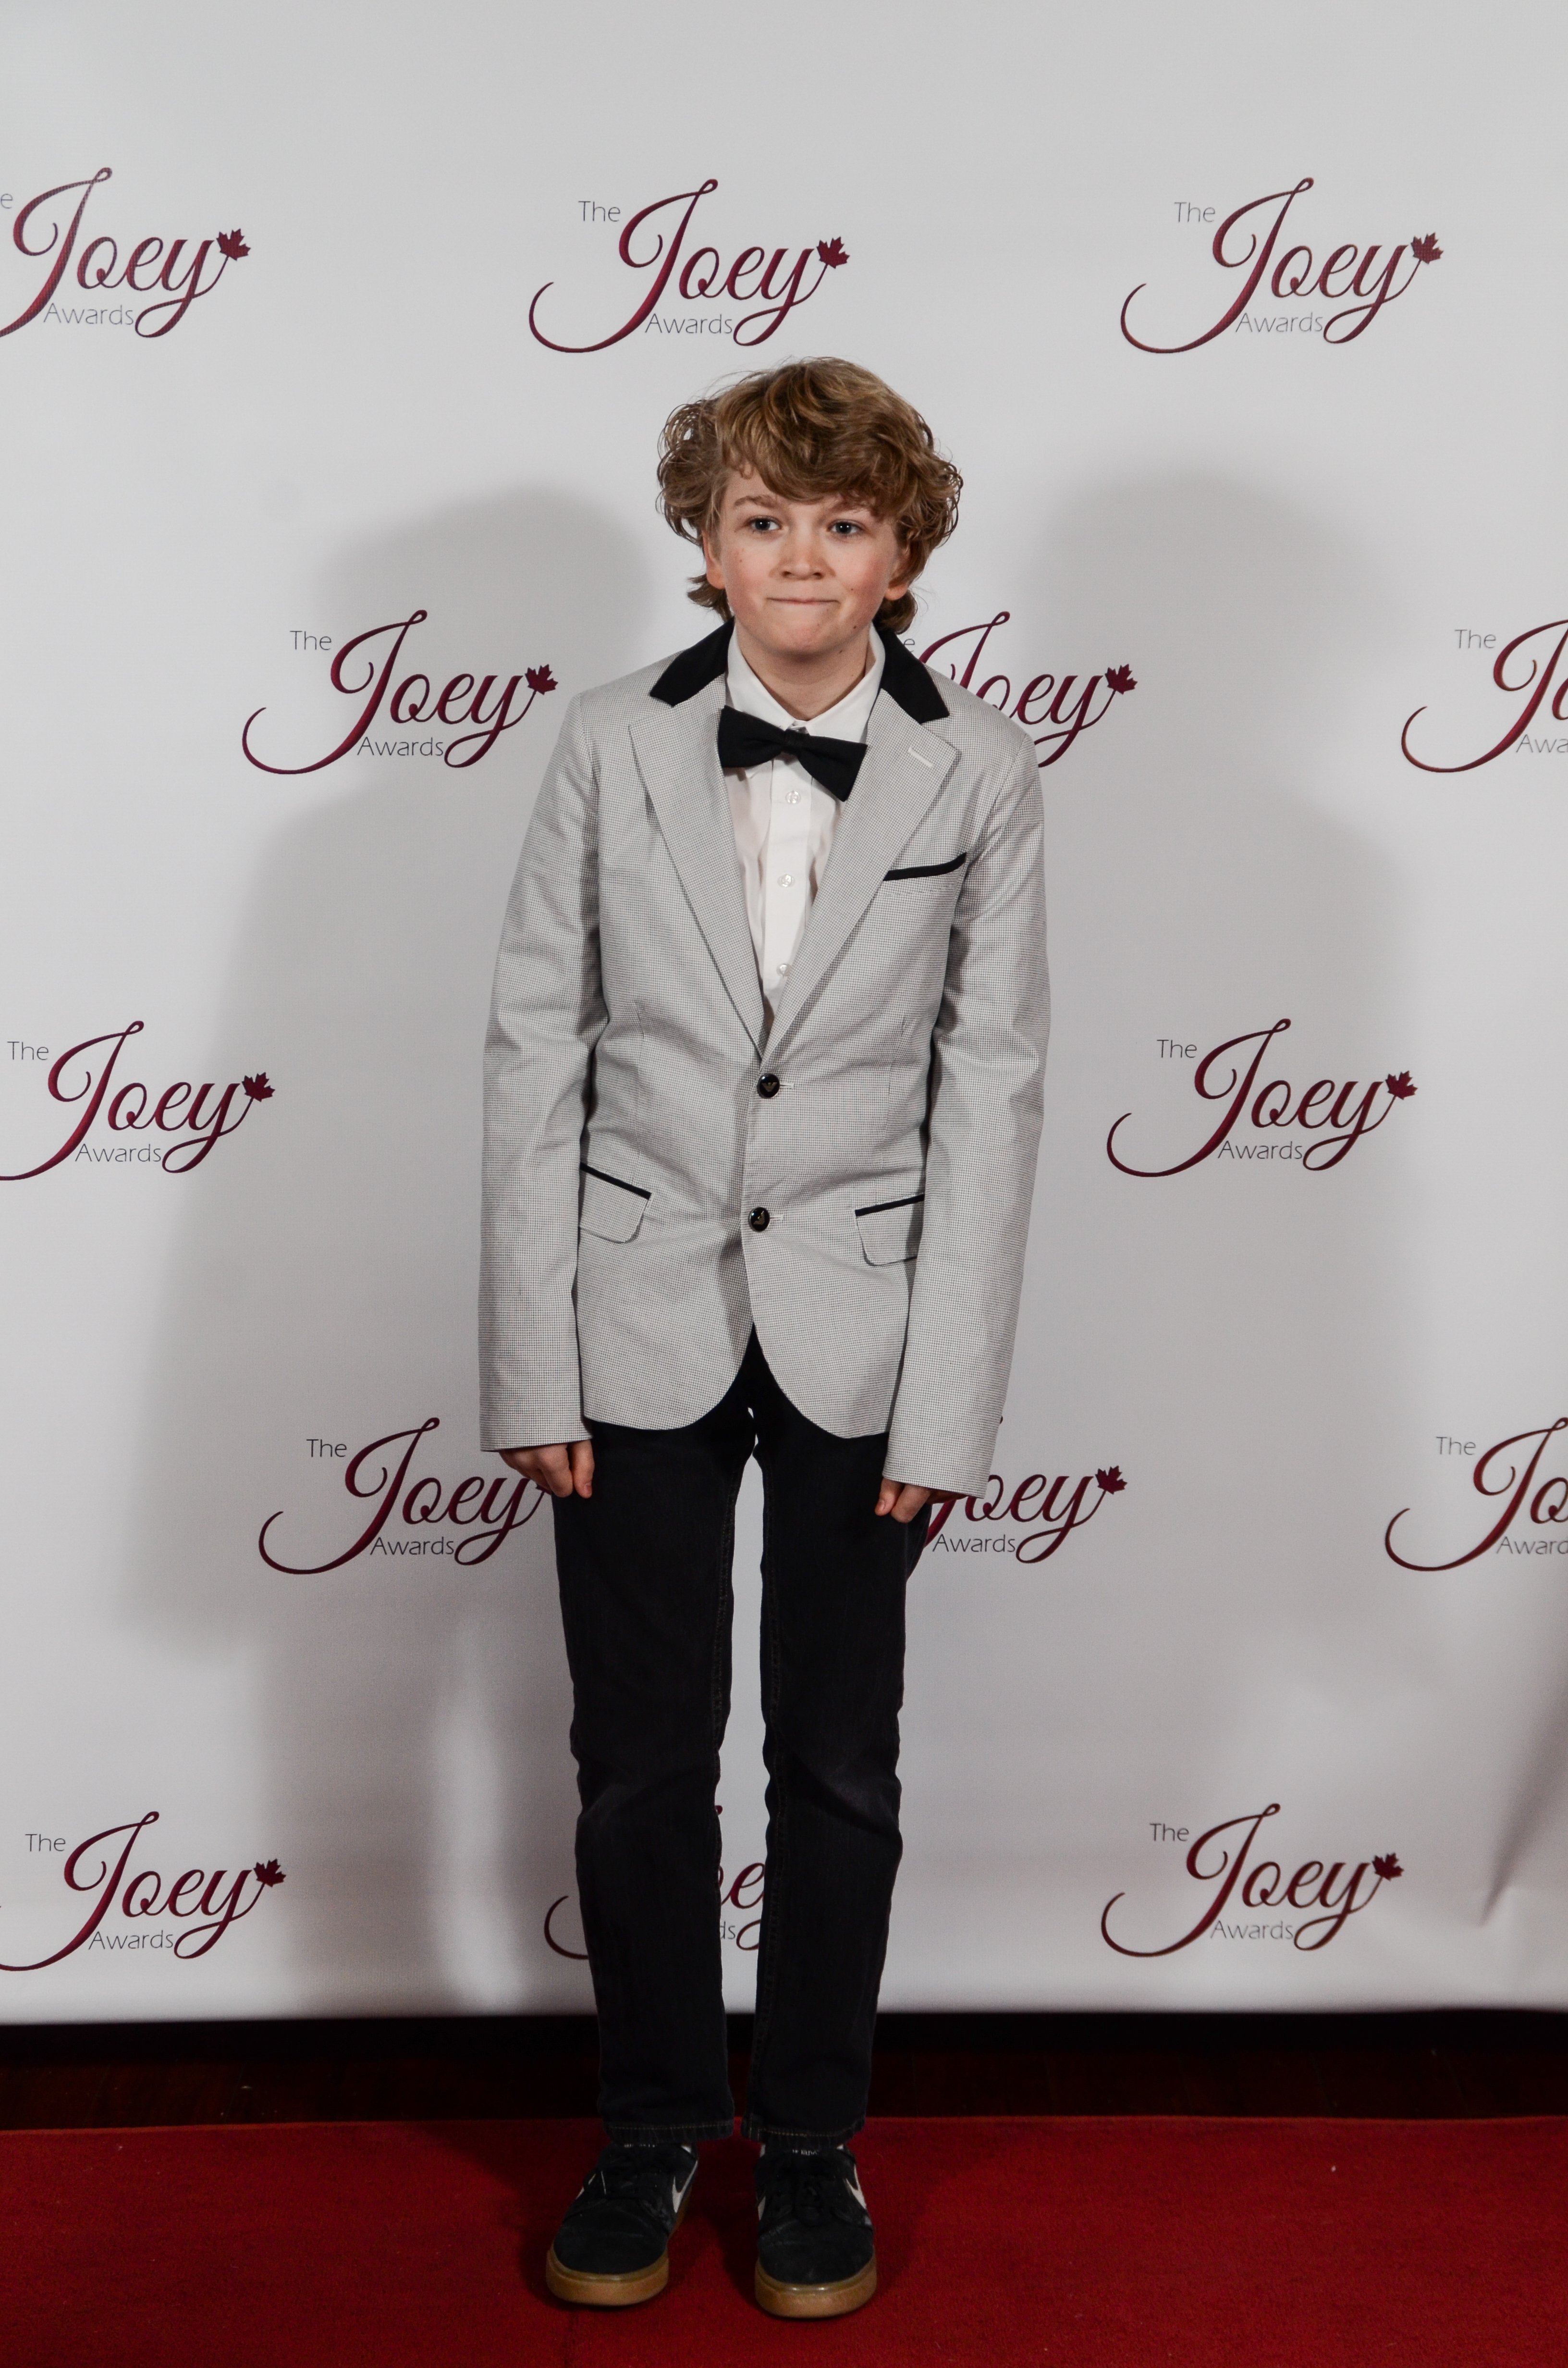 JOEY AWARDS - November 16, 2014 in Vancouver -Nominated for Young Actor in TV Series - The Haunting Hour (Toy Train)